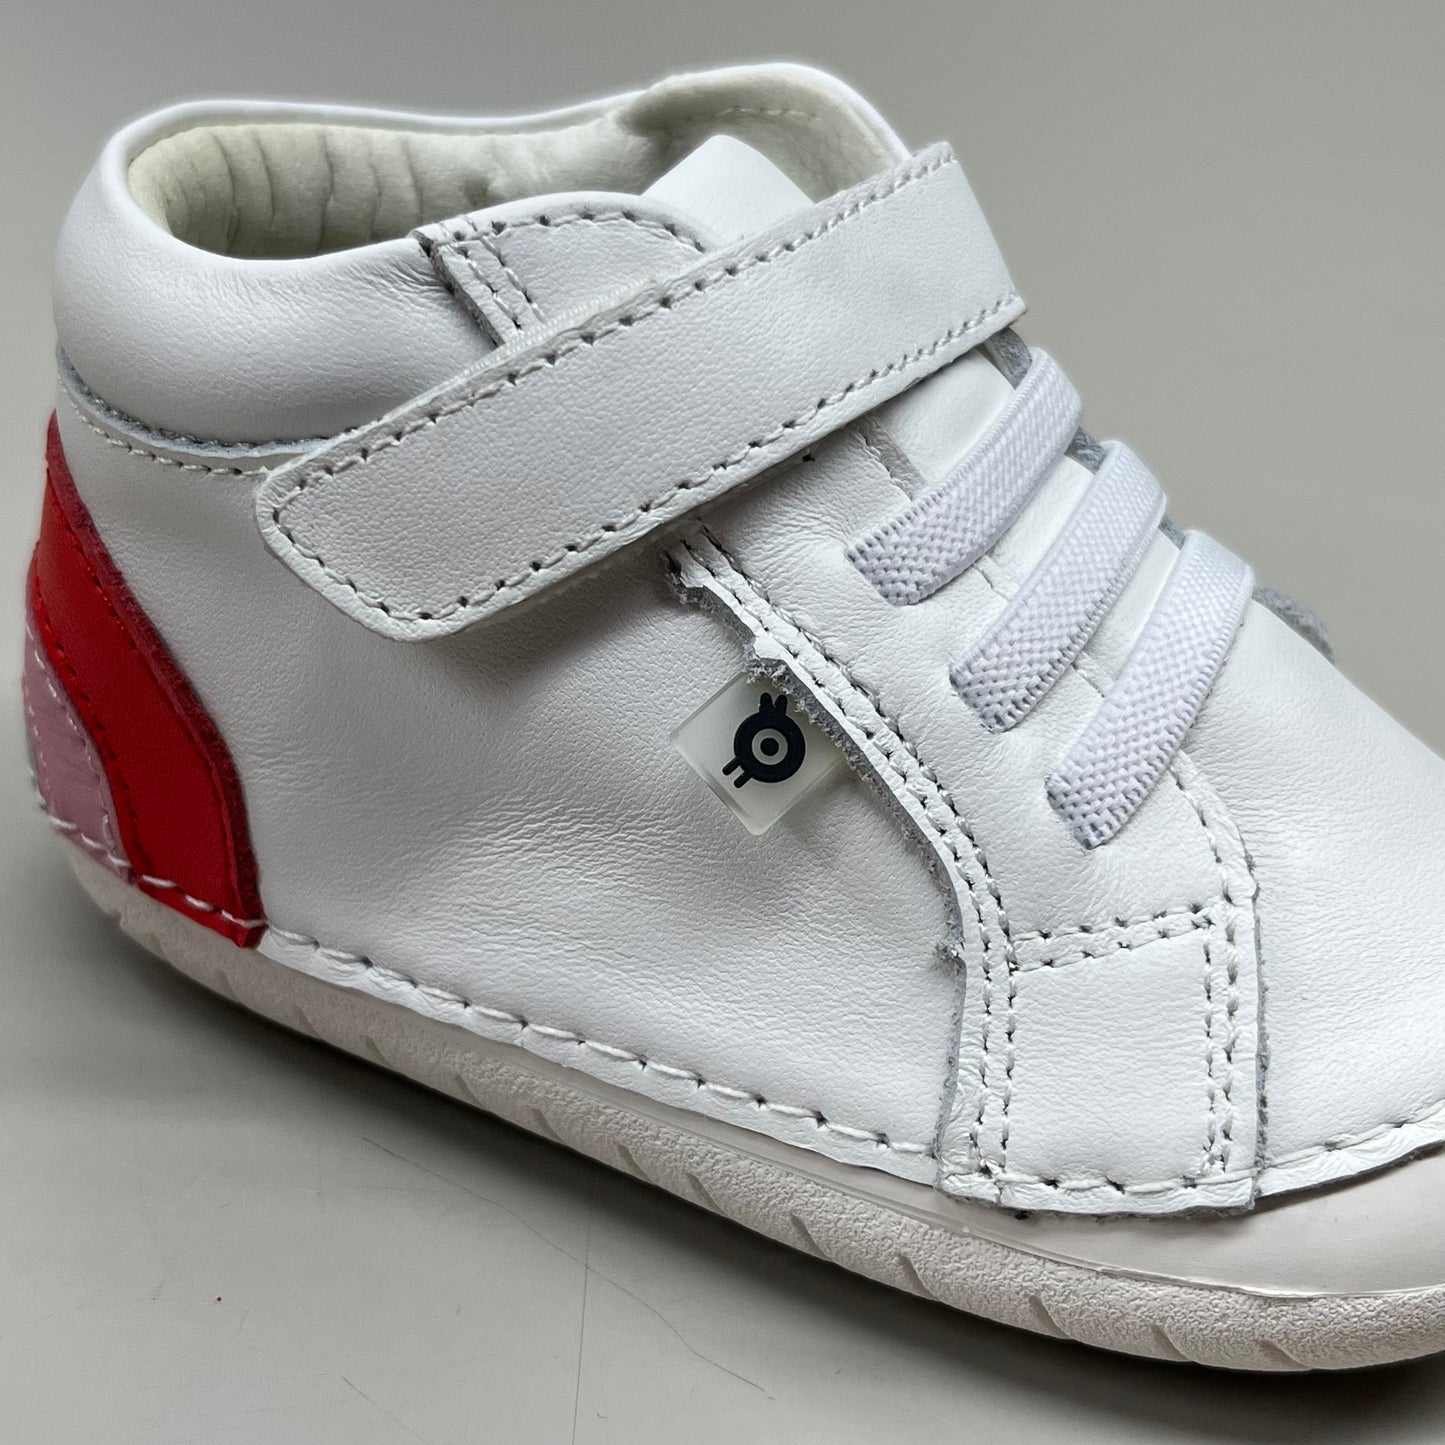 OLD SOLES Baby Champster Leather Shoe Sz 23 US 7 Snow/Red/ Pink/Silver #4091